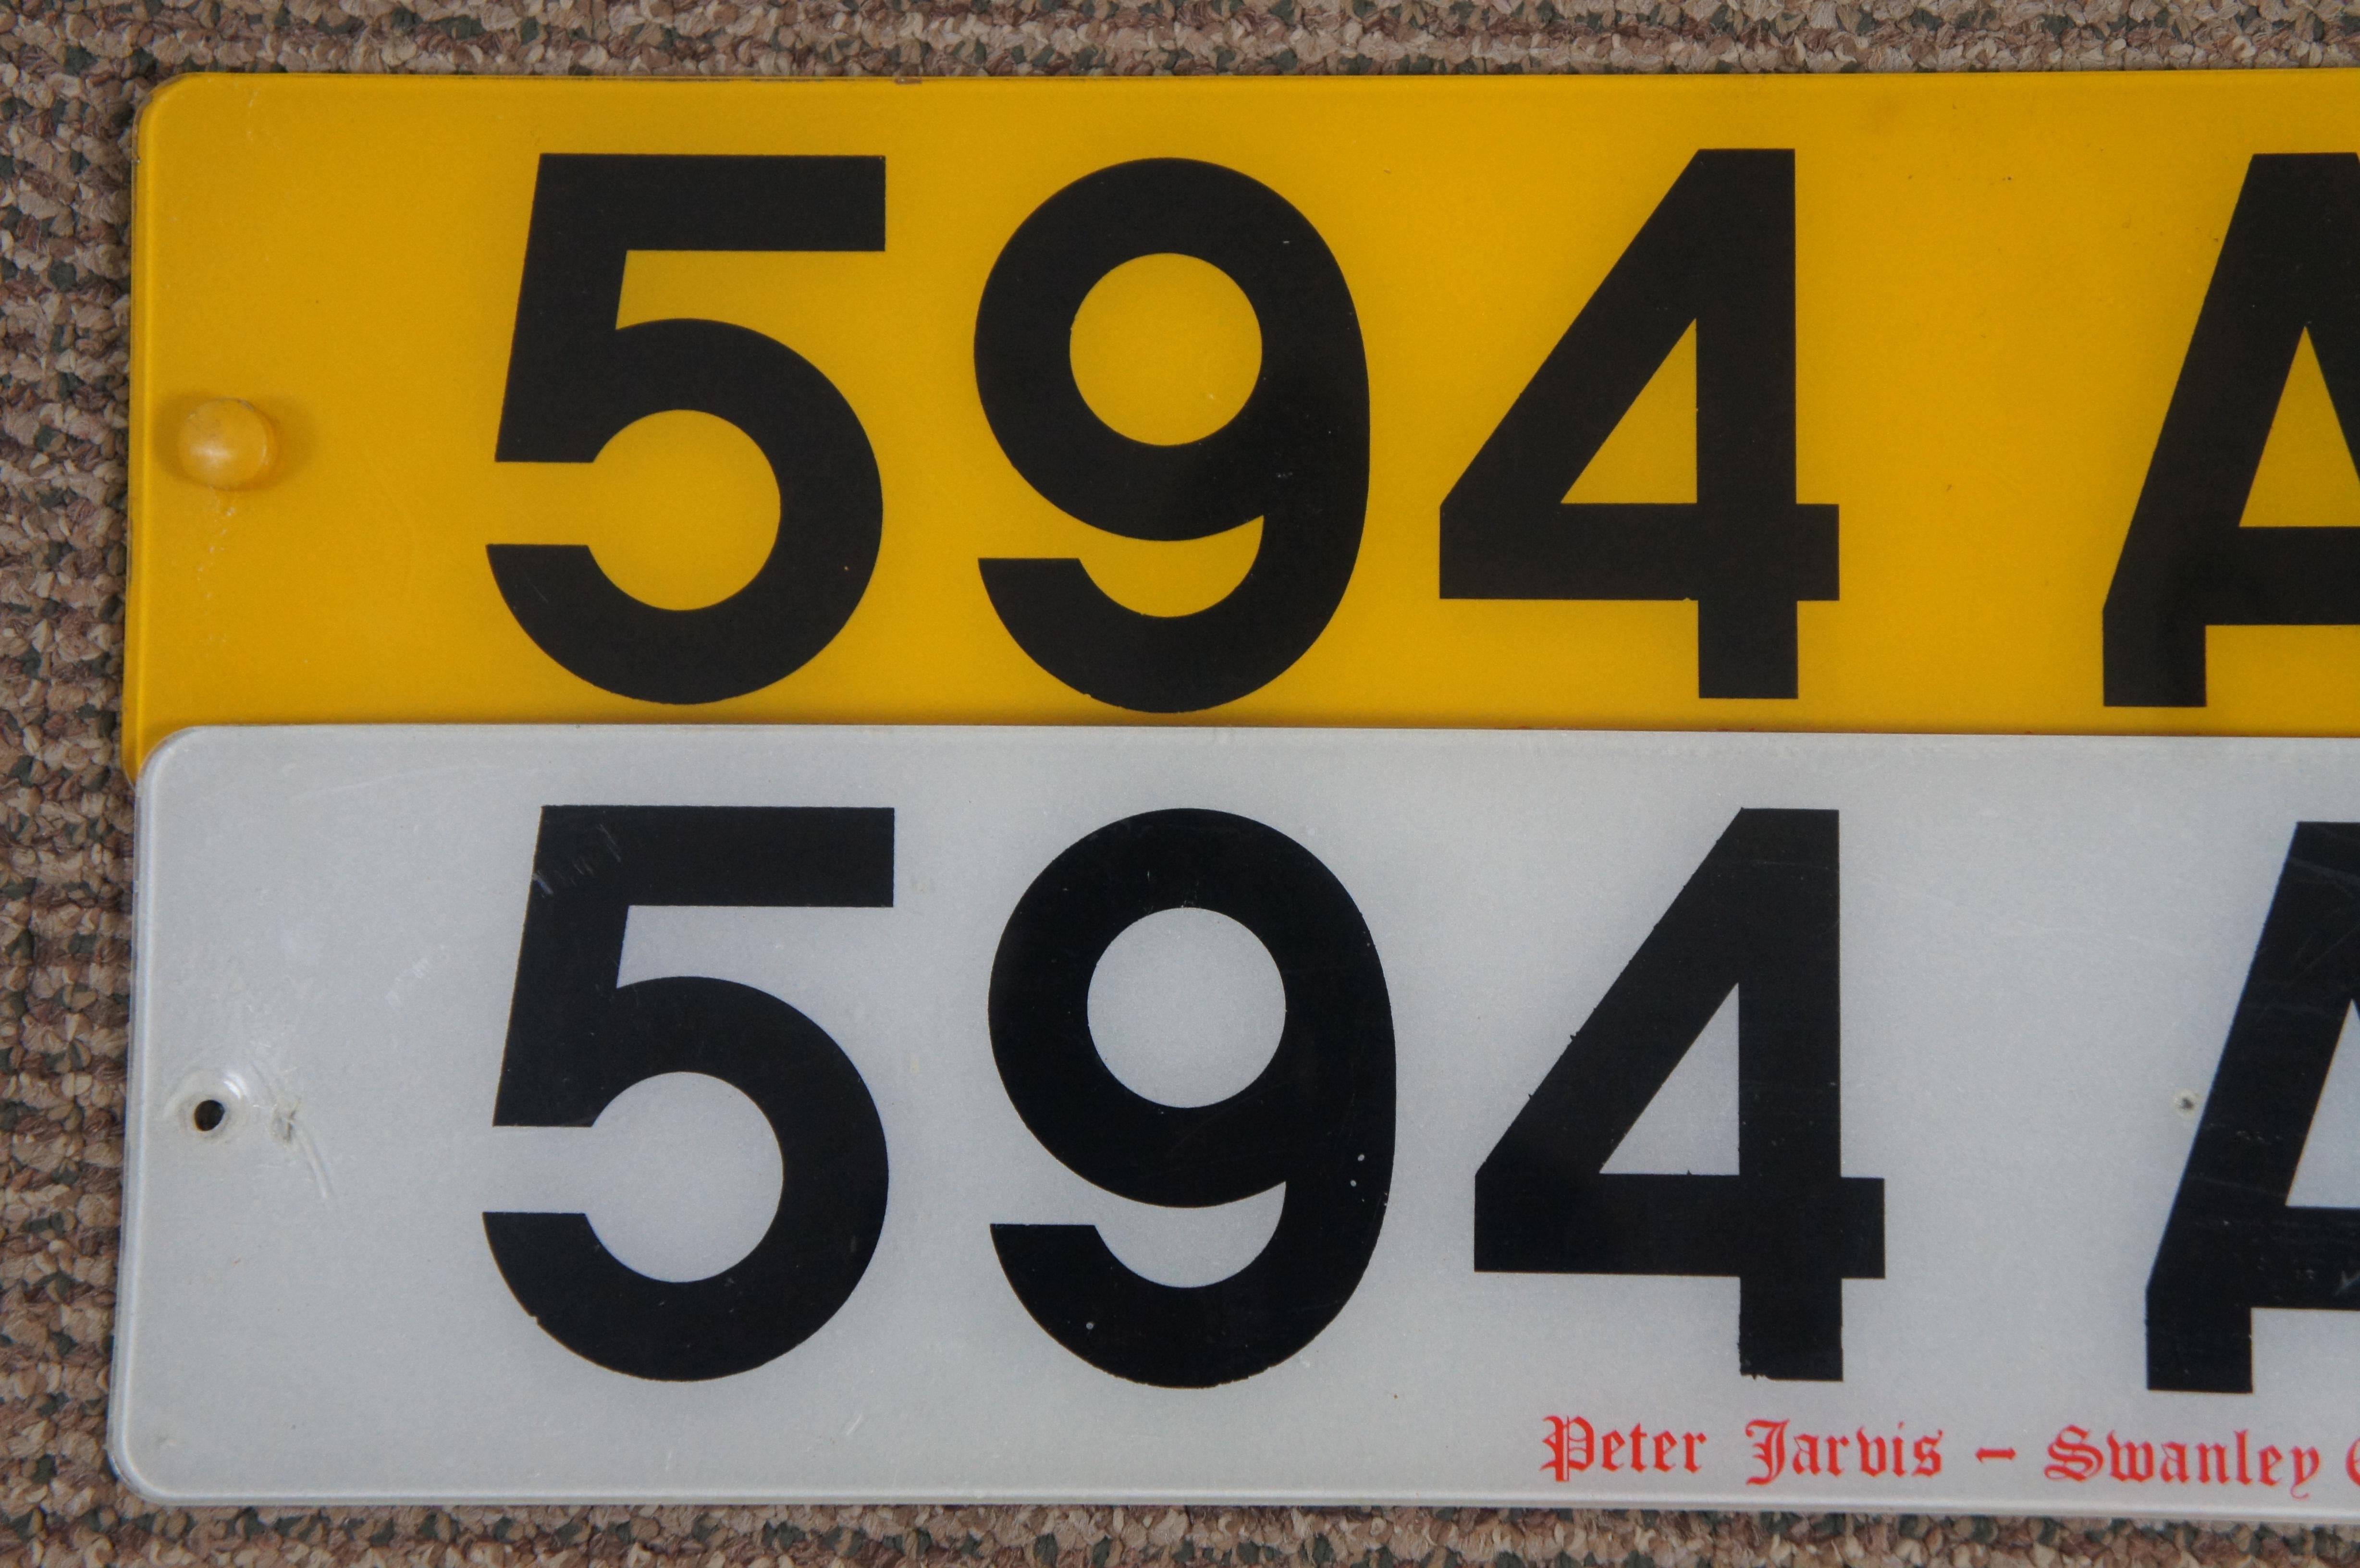 2 Peter Jarvis Euro Car Dealer Vehicle Registration License Plates Yellow White  2